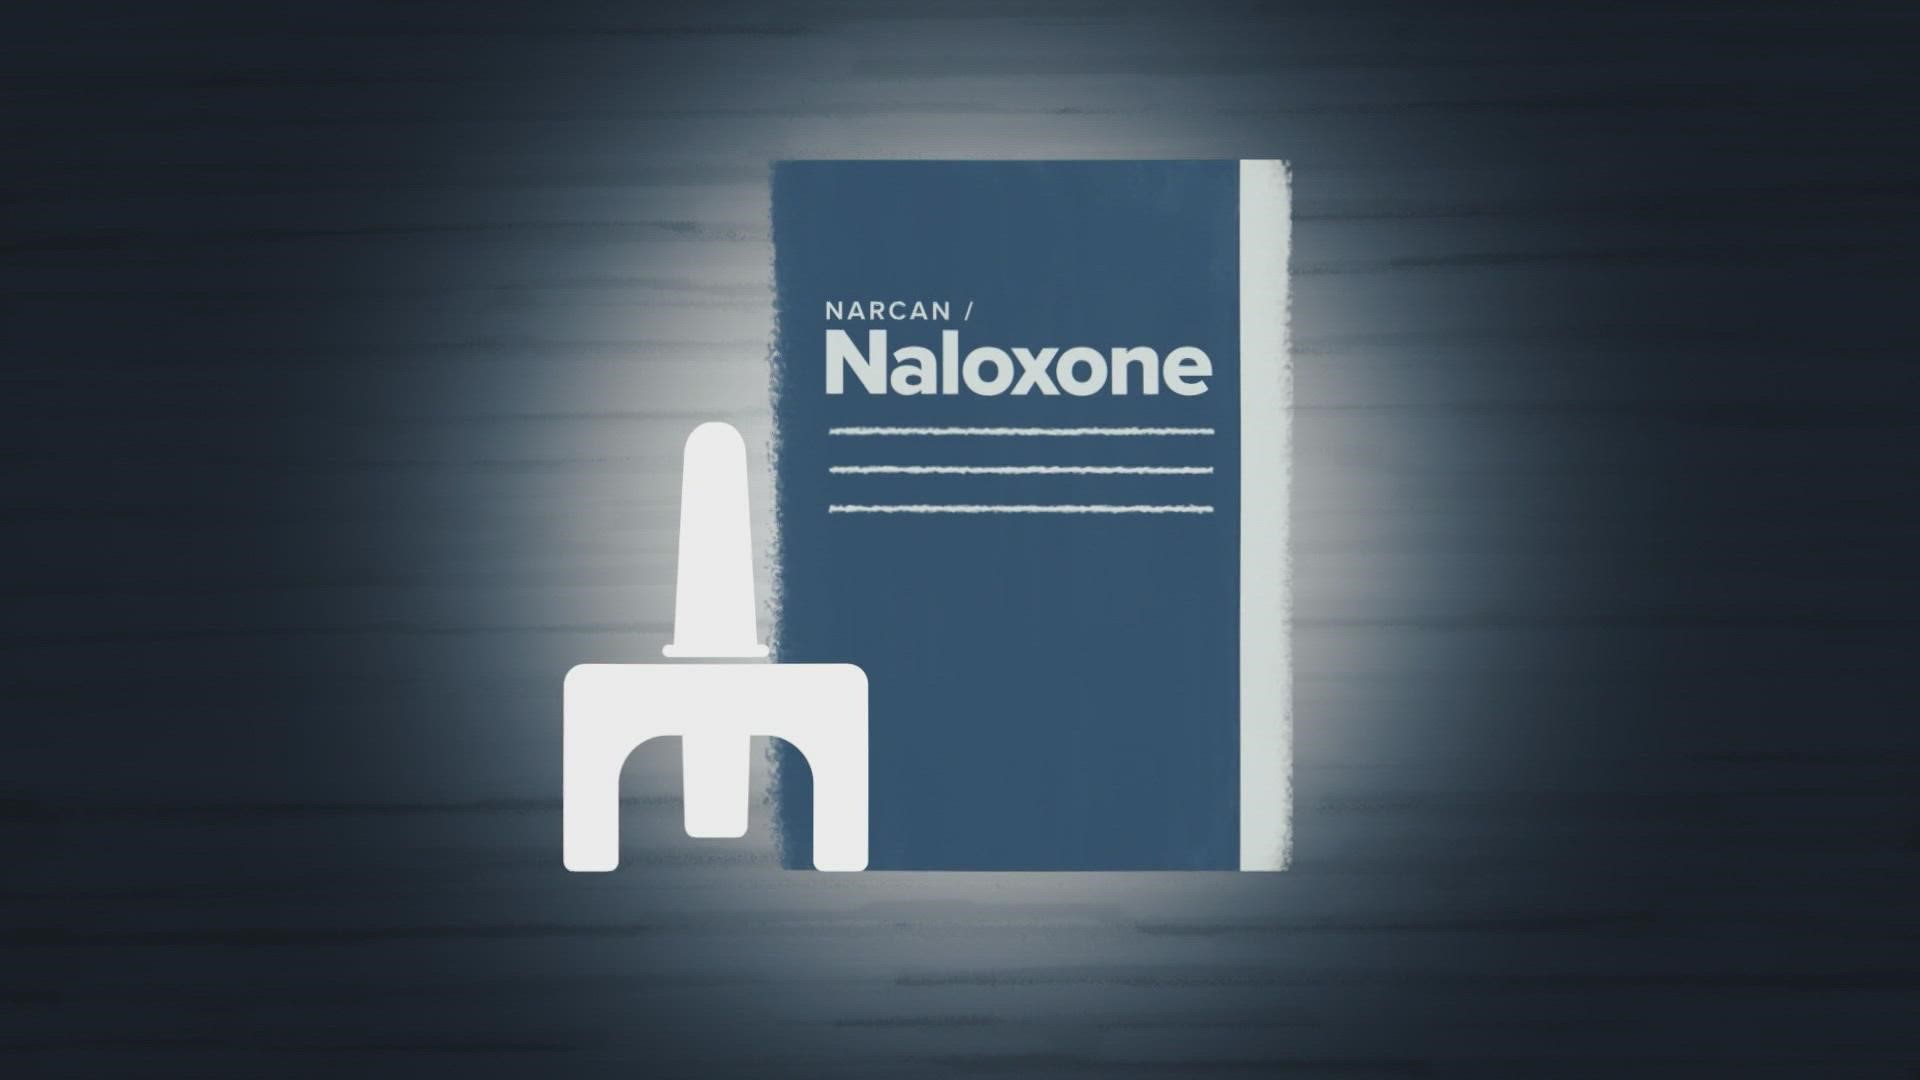 Naloxone, or Narcan, is designed to help block a narcotic overdose. Here's how it works.